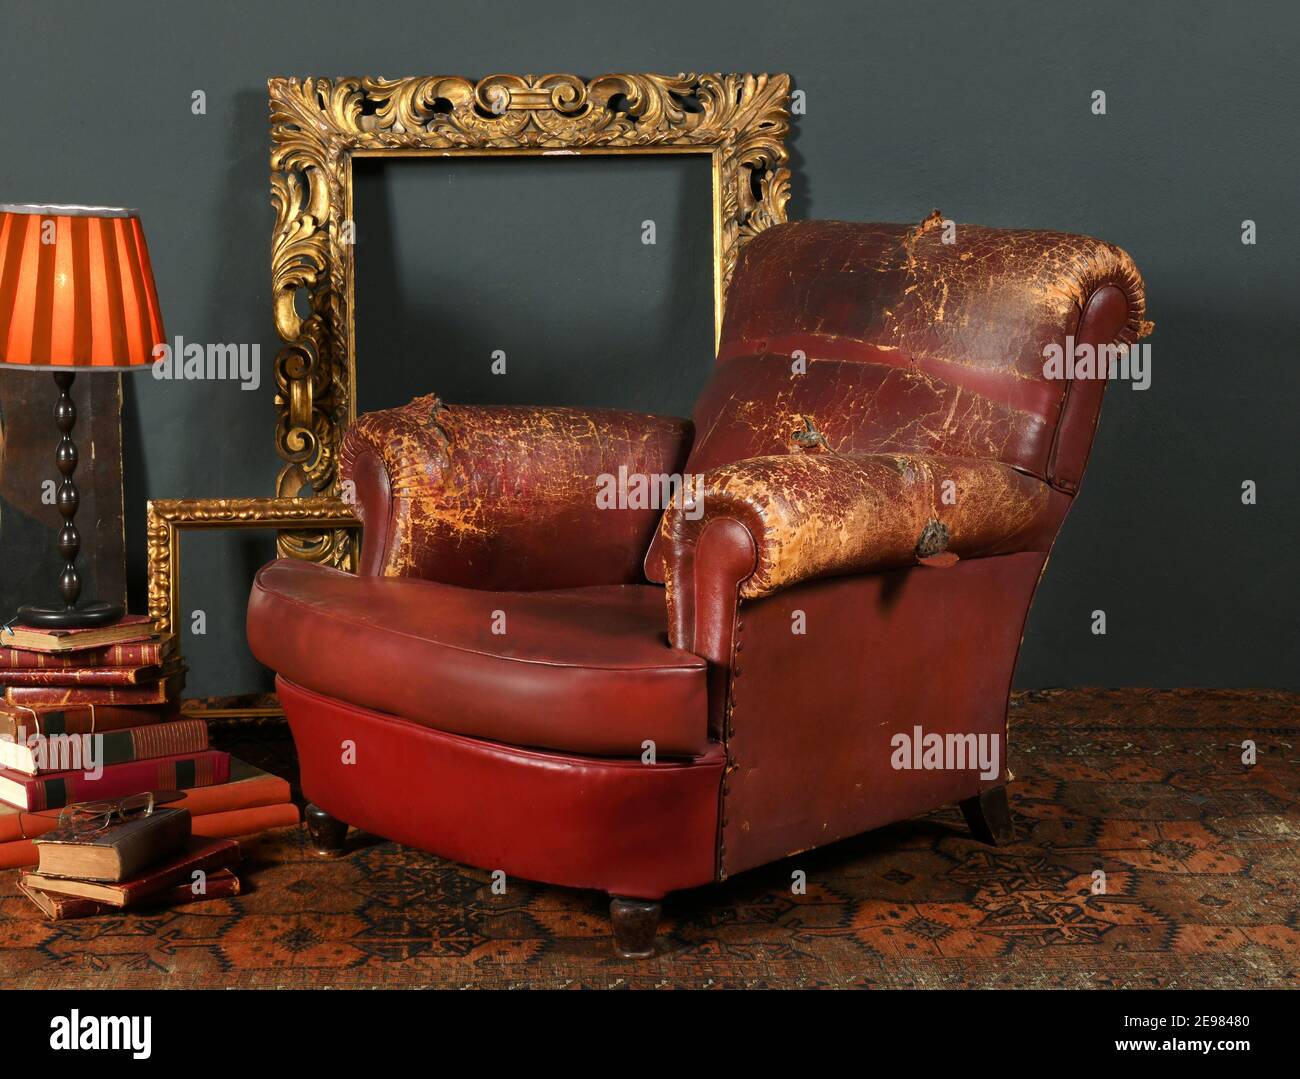 Old shabby red leather armchair placed near vintage decorative frames and  lamp in room with retro style interior Stock Photo - Alamy